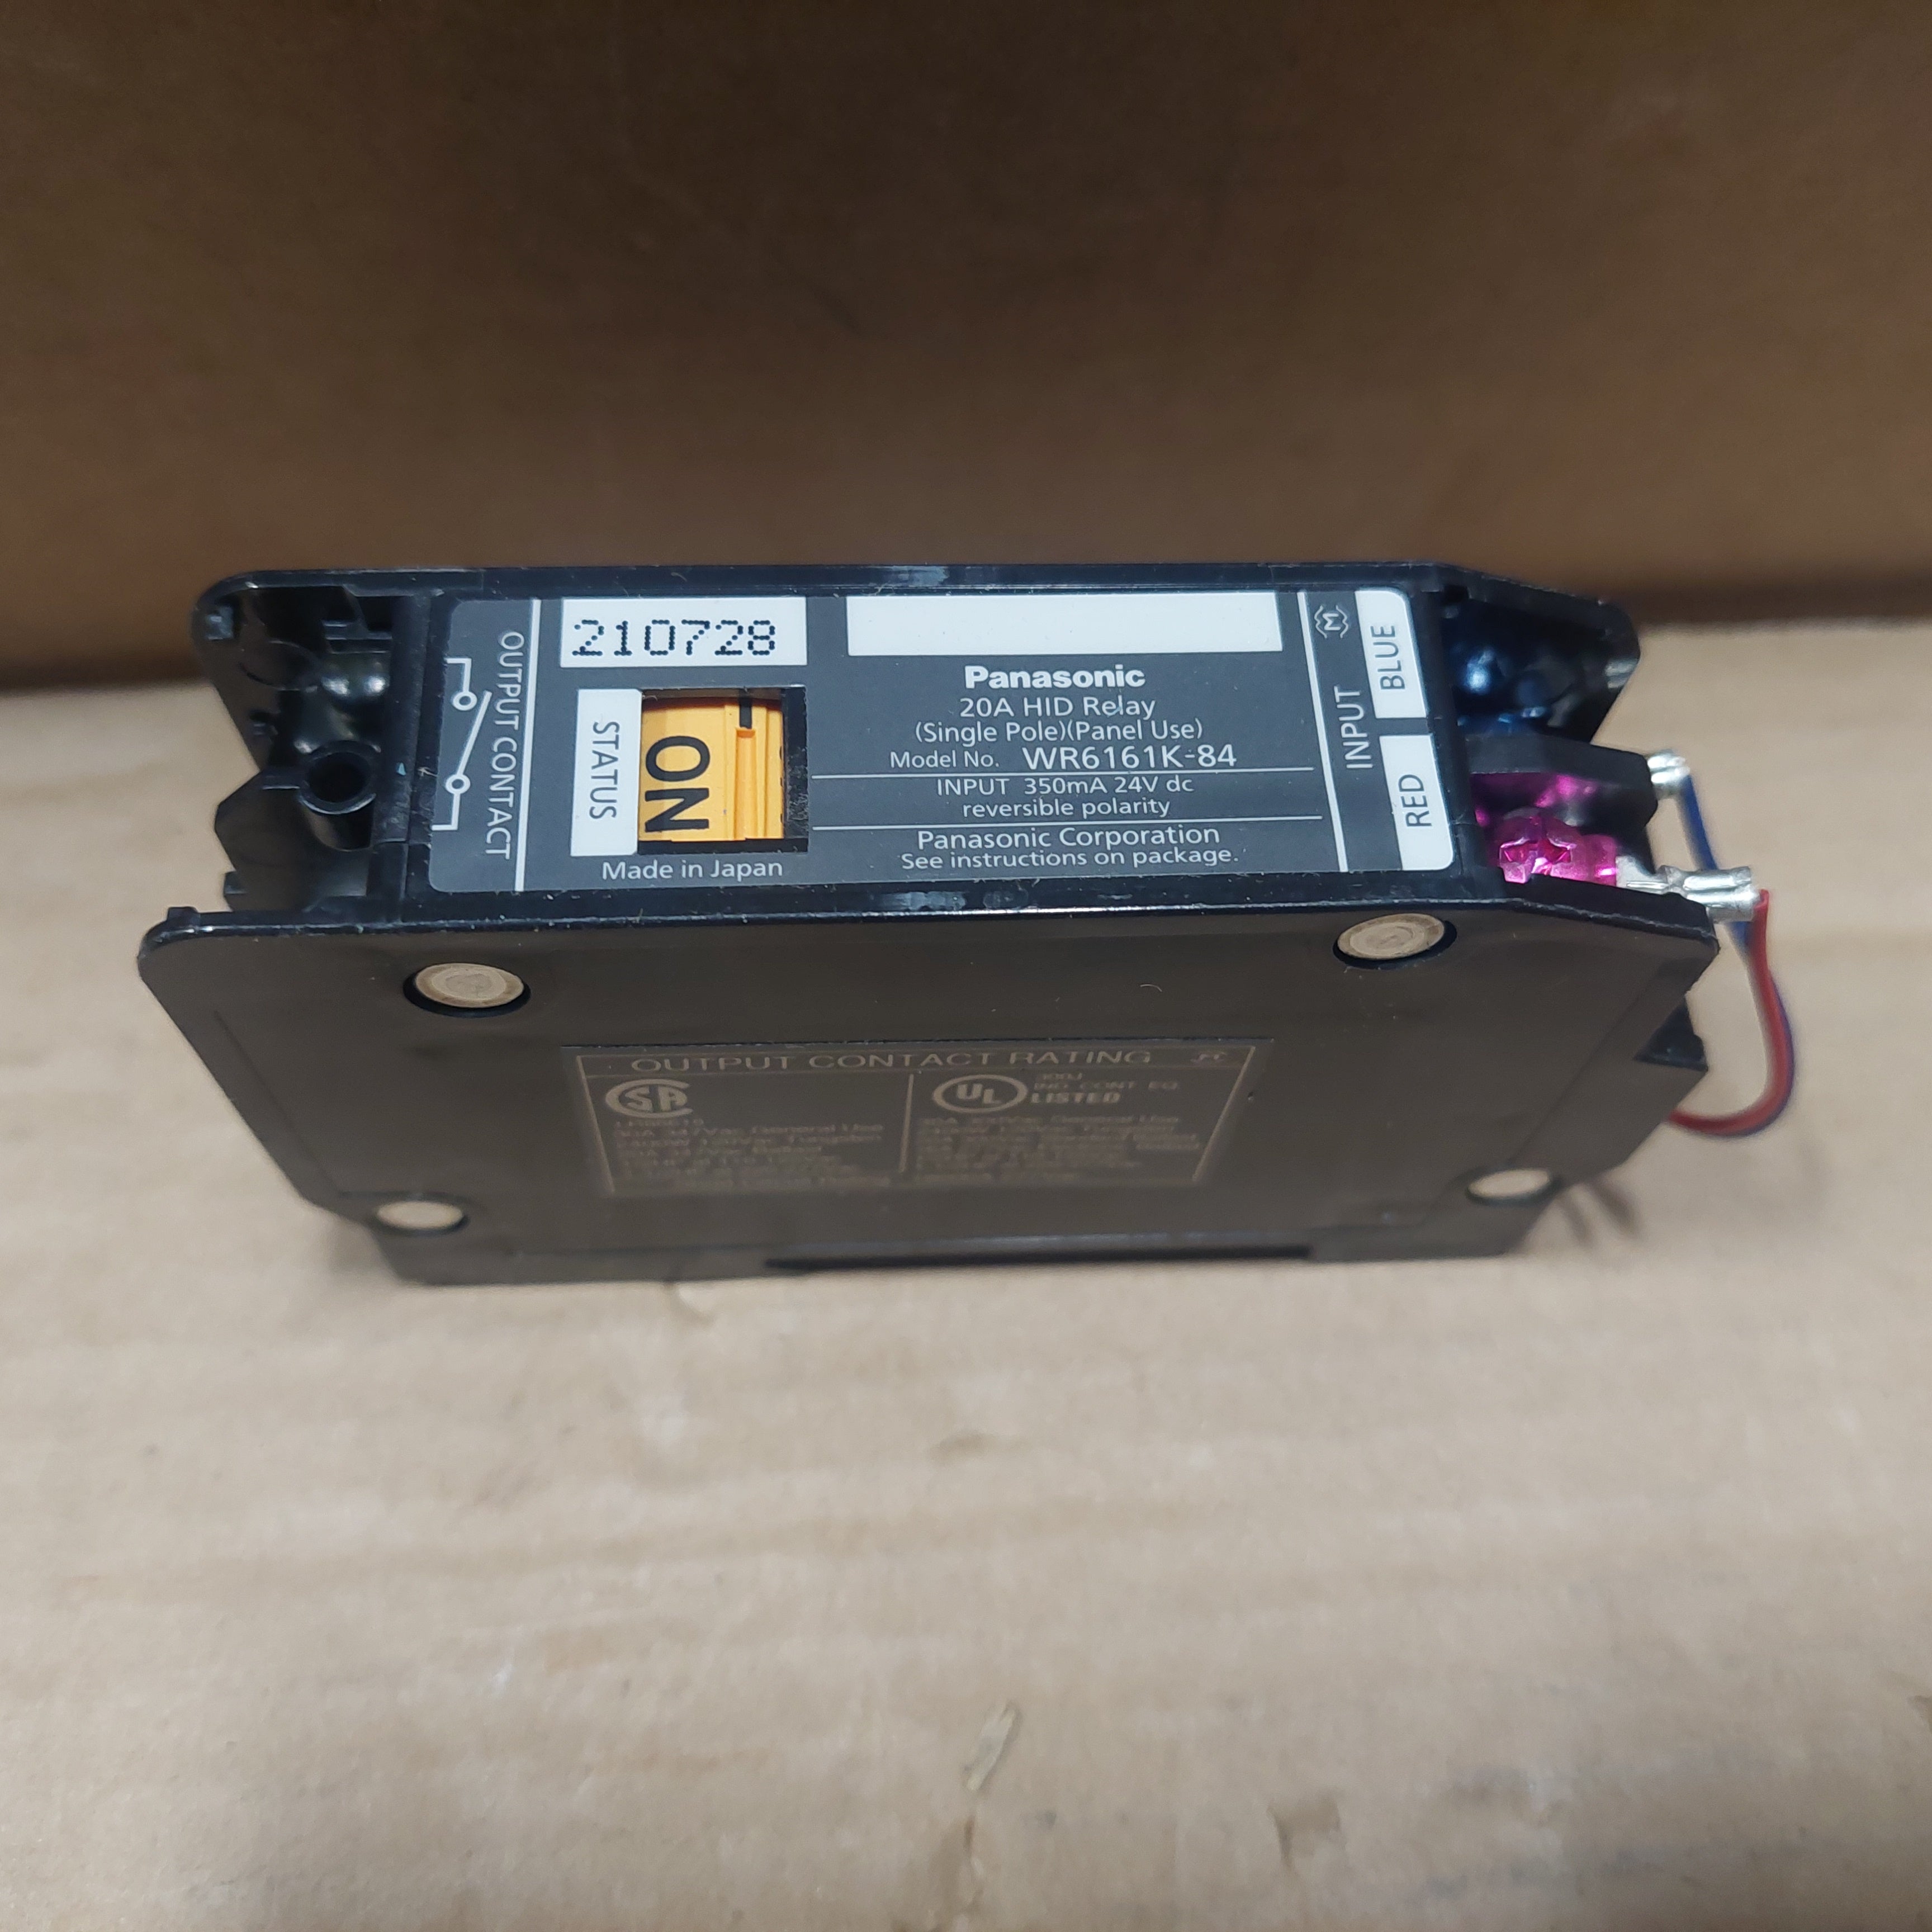 Hubbell Panasonic WR6161K-84 20A HID Relay New